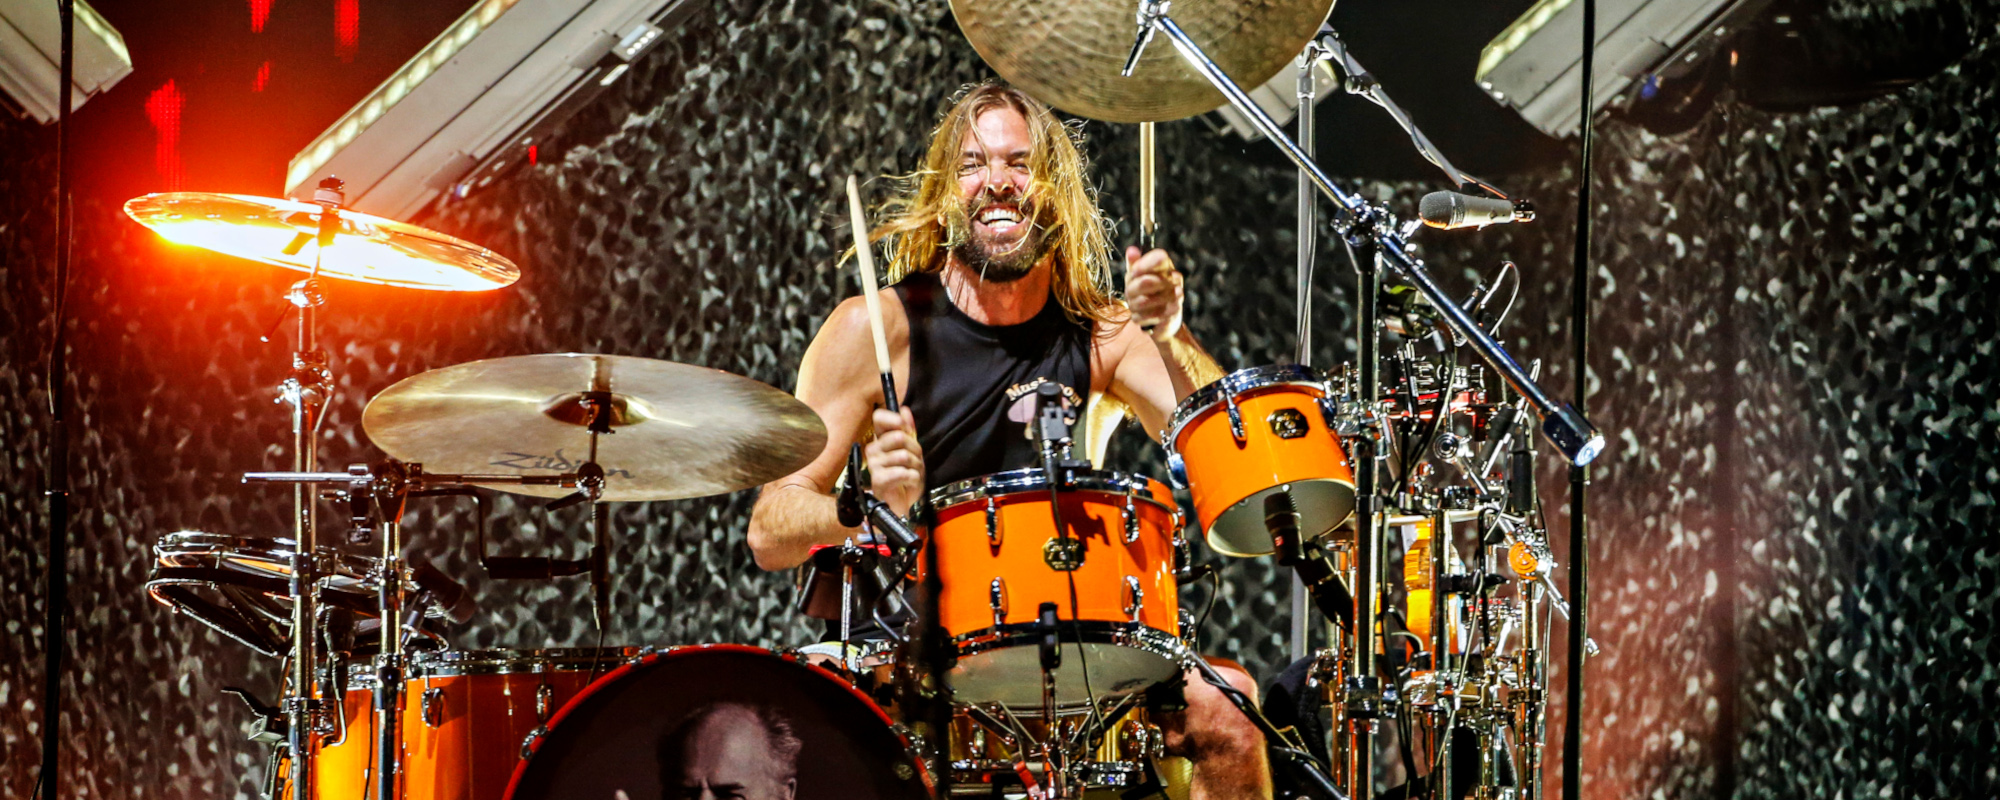 Posthumous Recording from Taylor Hawkins Released: “Guess I’ll Go Away” by Johnny Winter